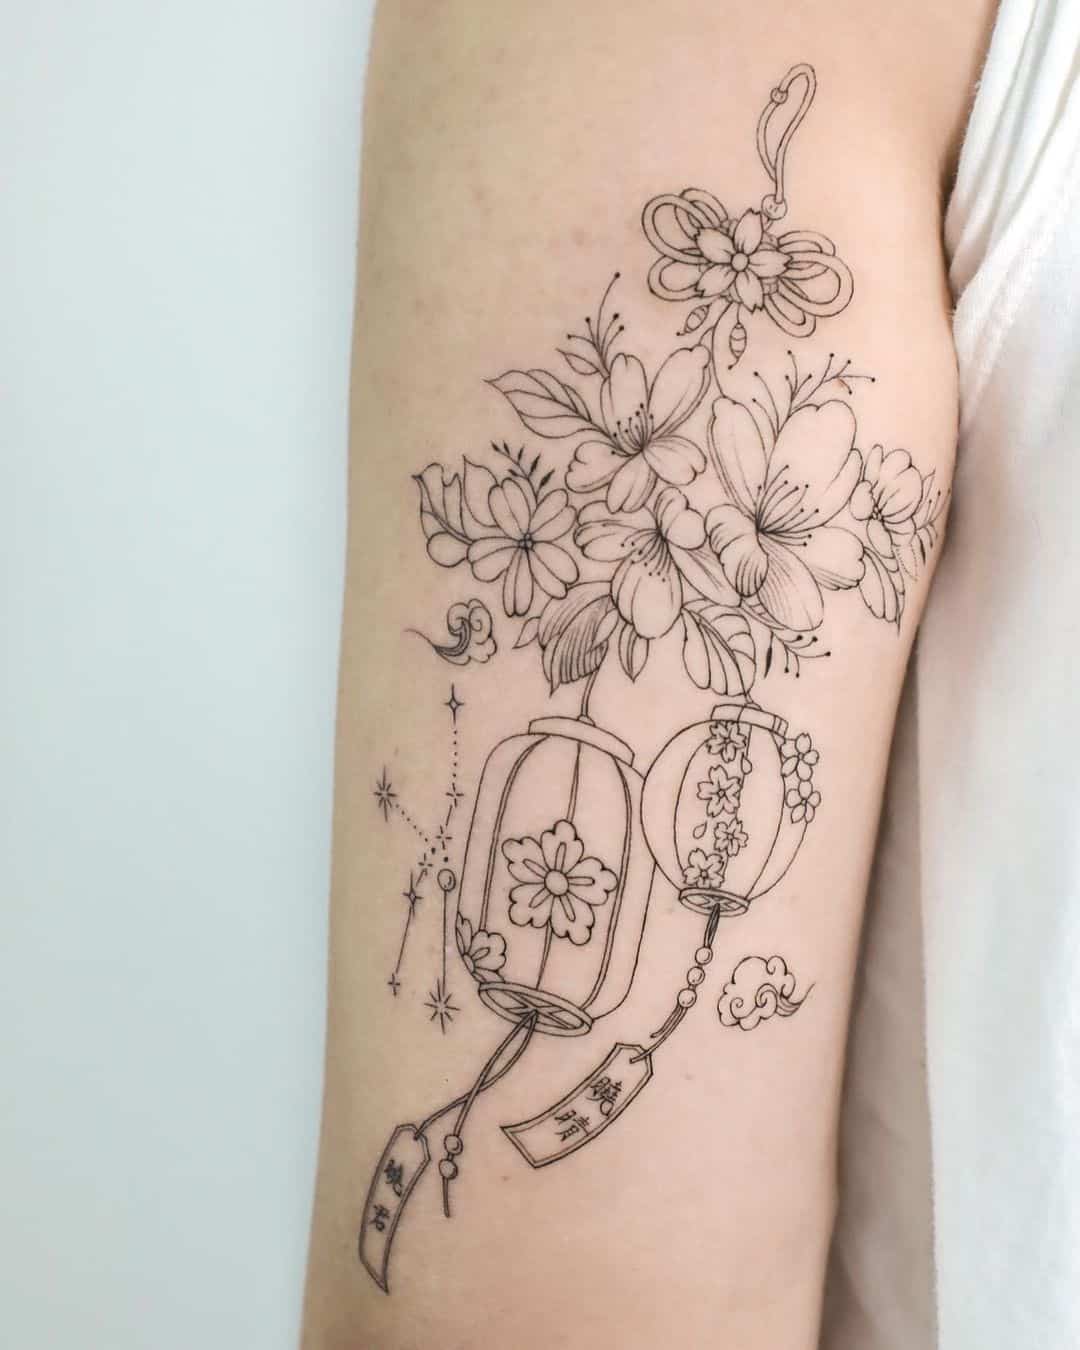 An Artist Does Mesmerizing Tattoos Inspired by Traditional Chinese Painting   Bright Side